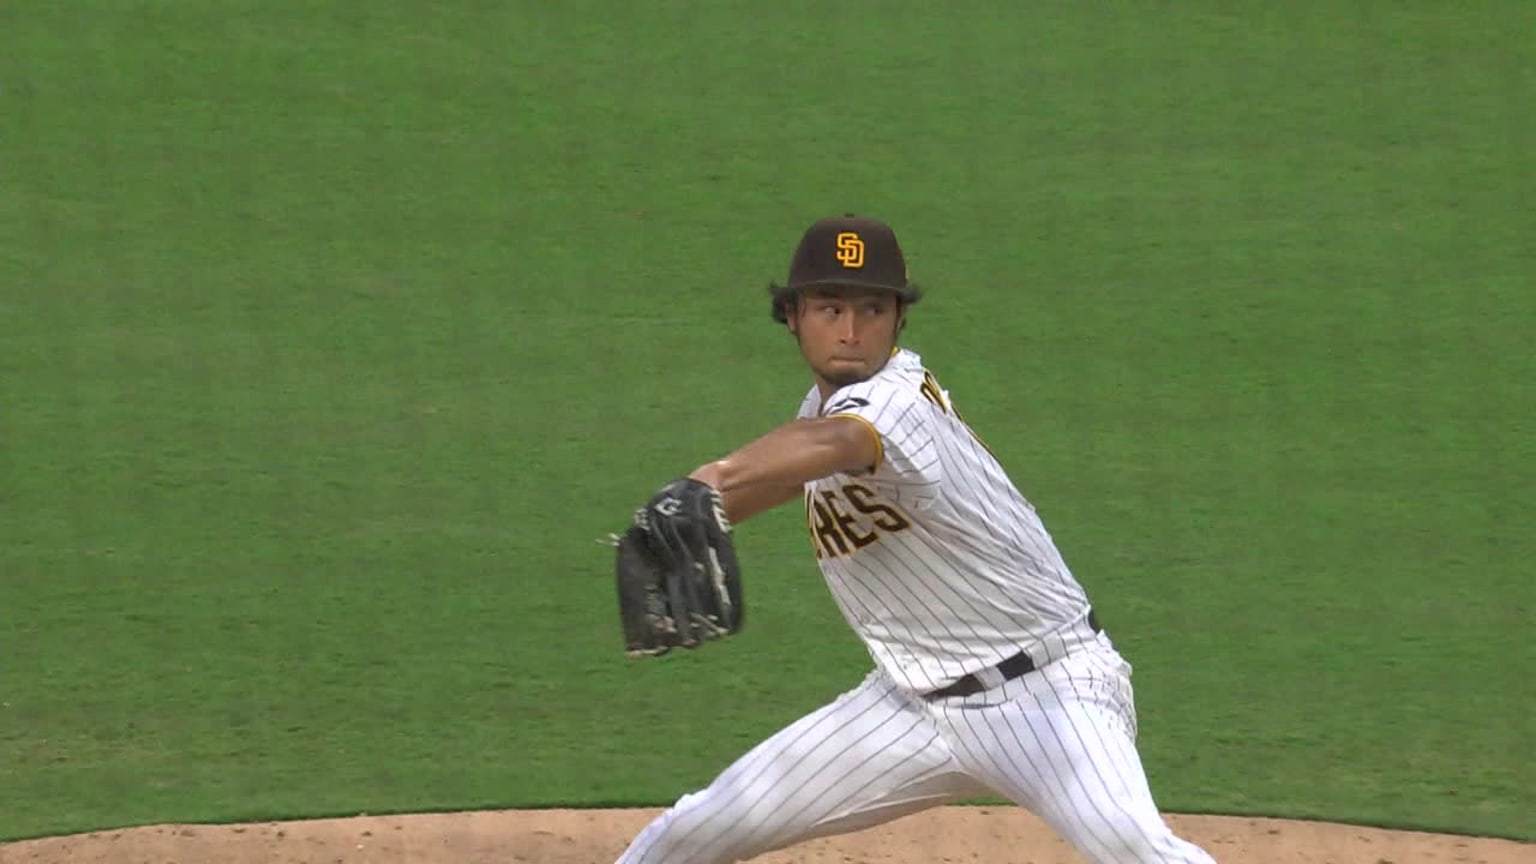 Yu Darvish's son, Shoei Darvish, is getting some work in in front